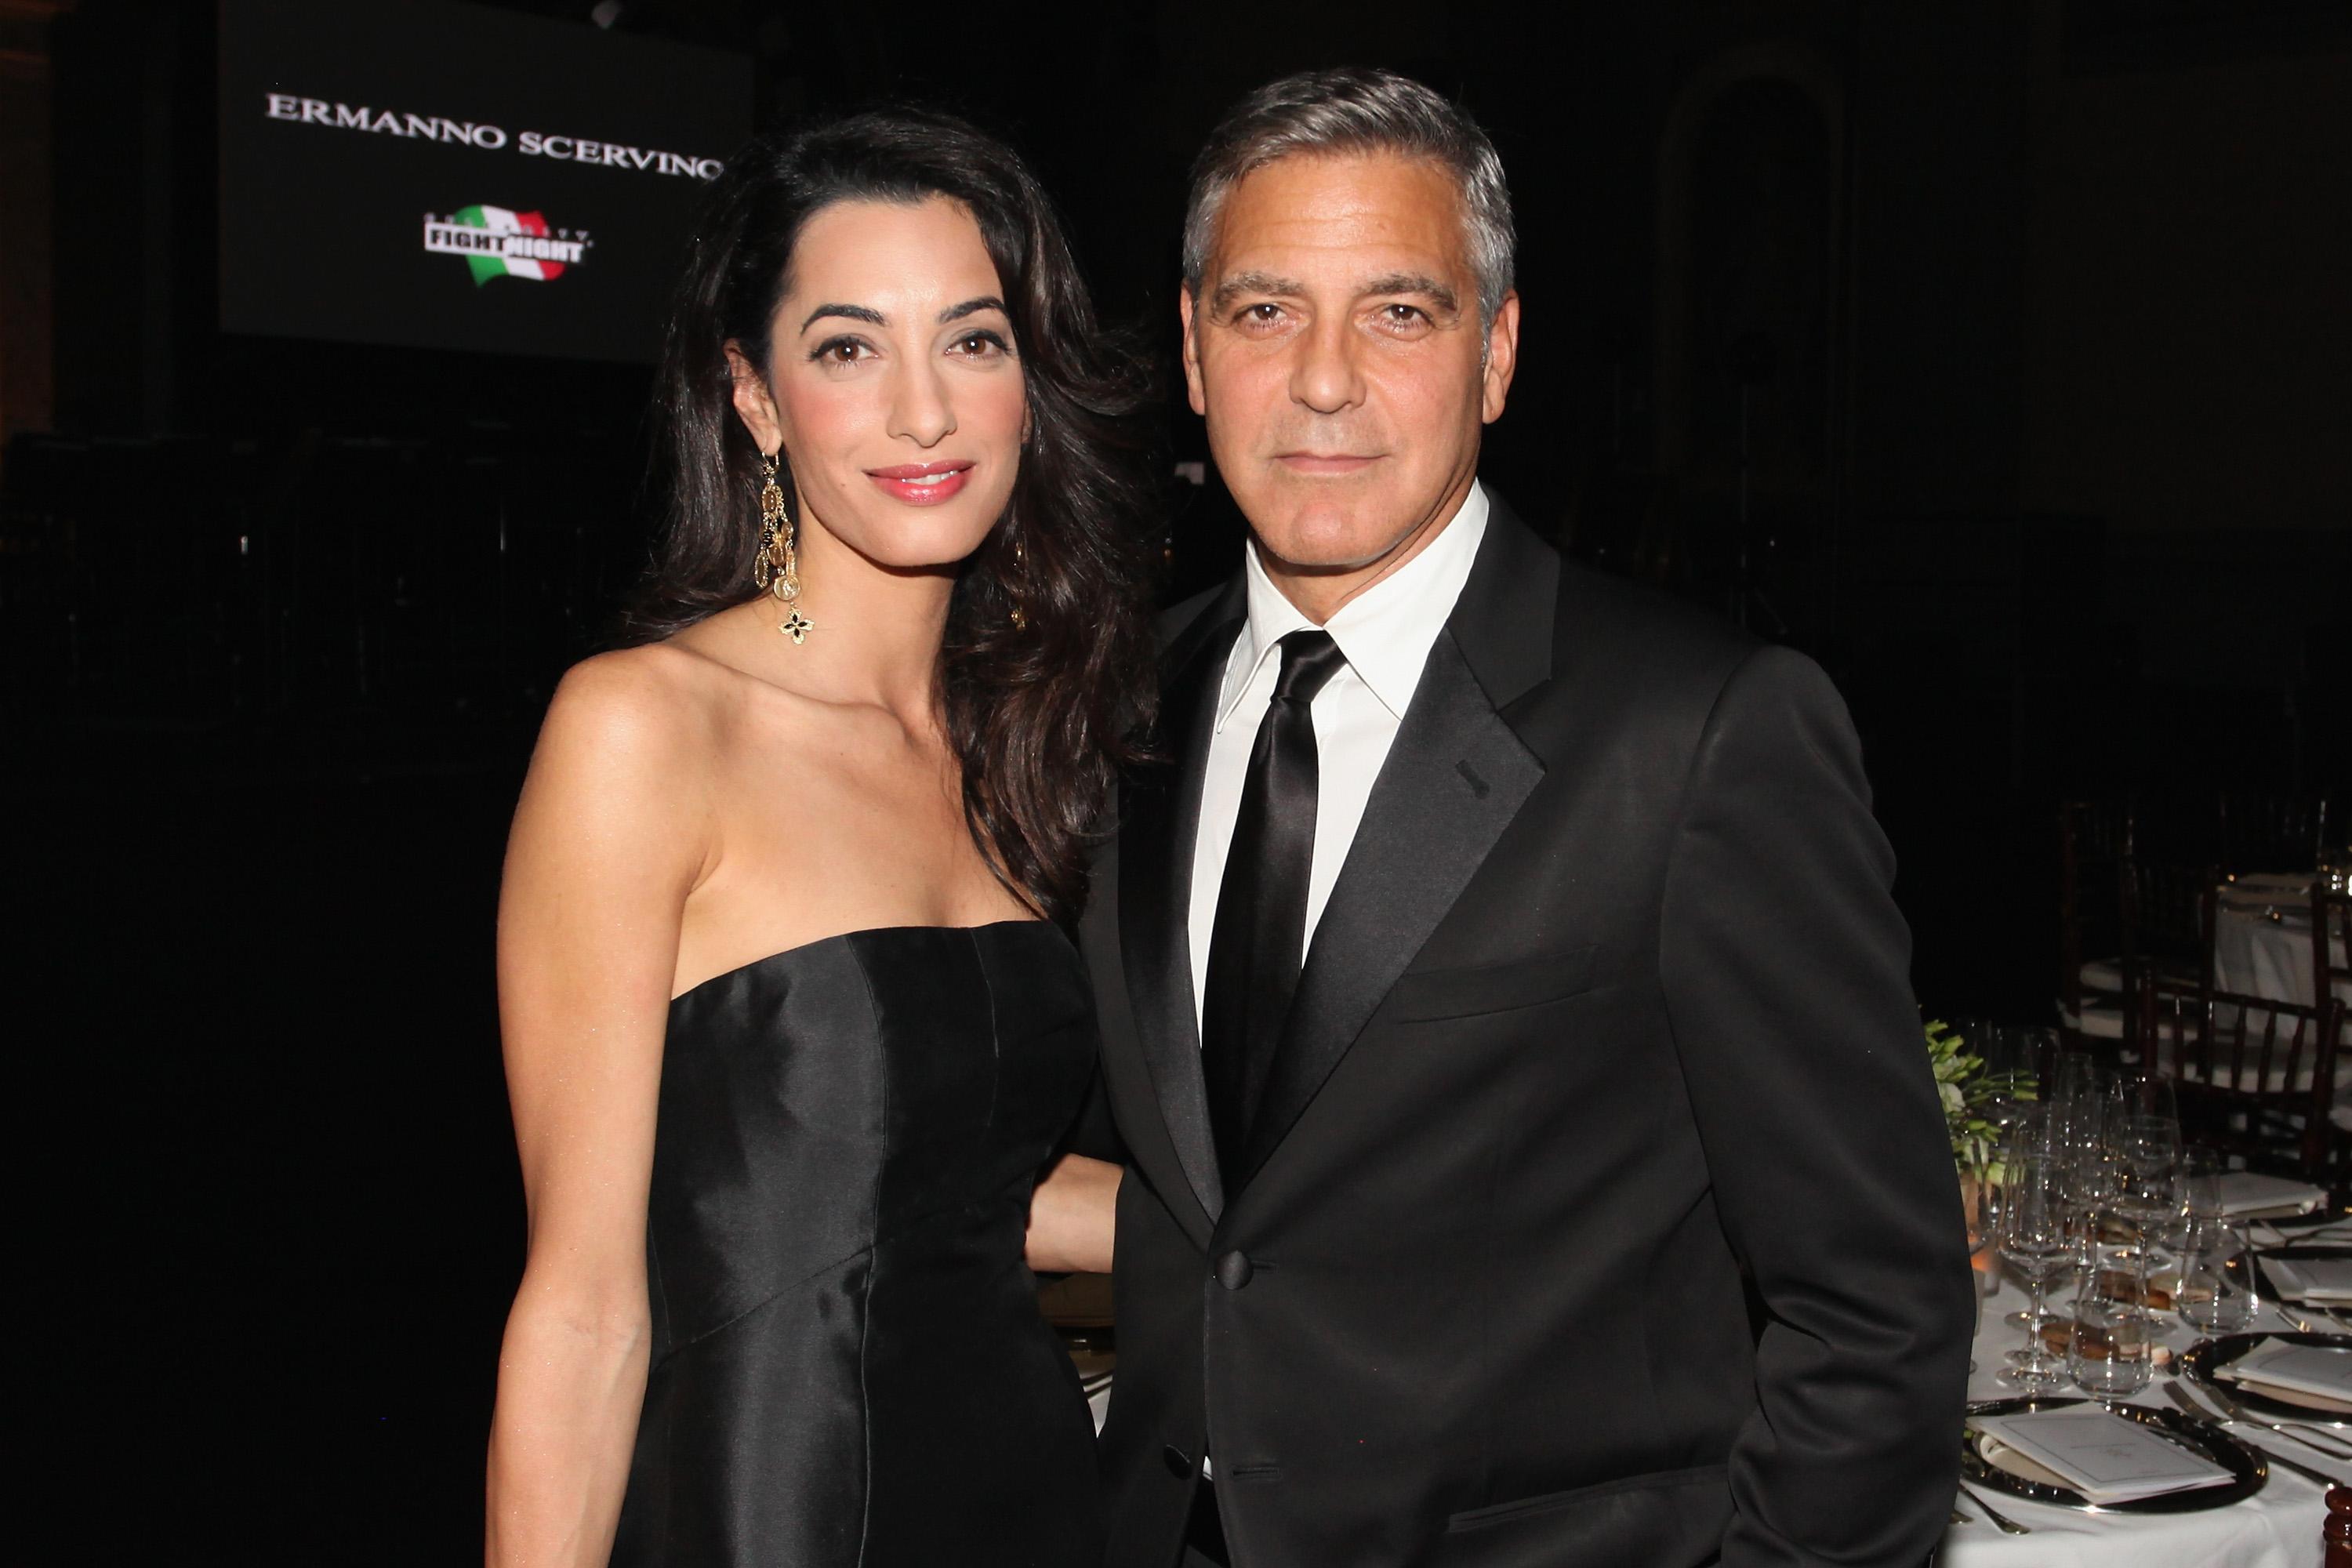 George and Amal Clooney wearing black and posing with their arms wrapped around each other. 